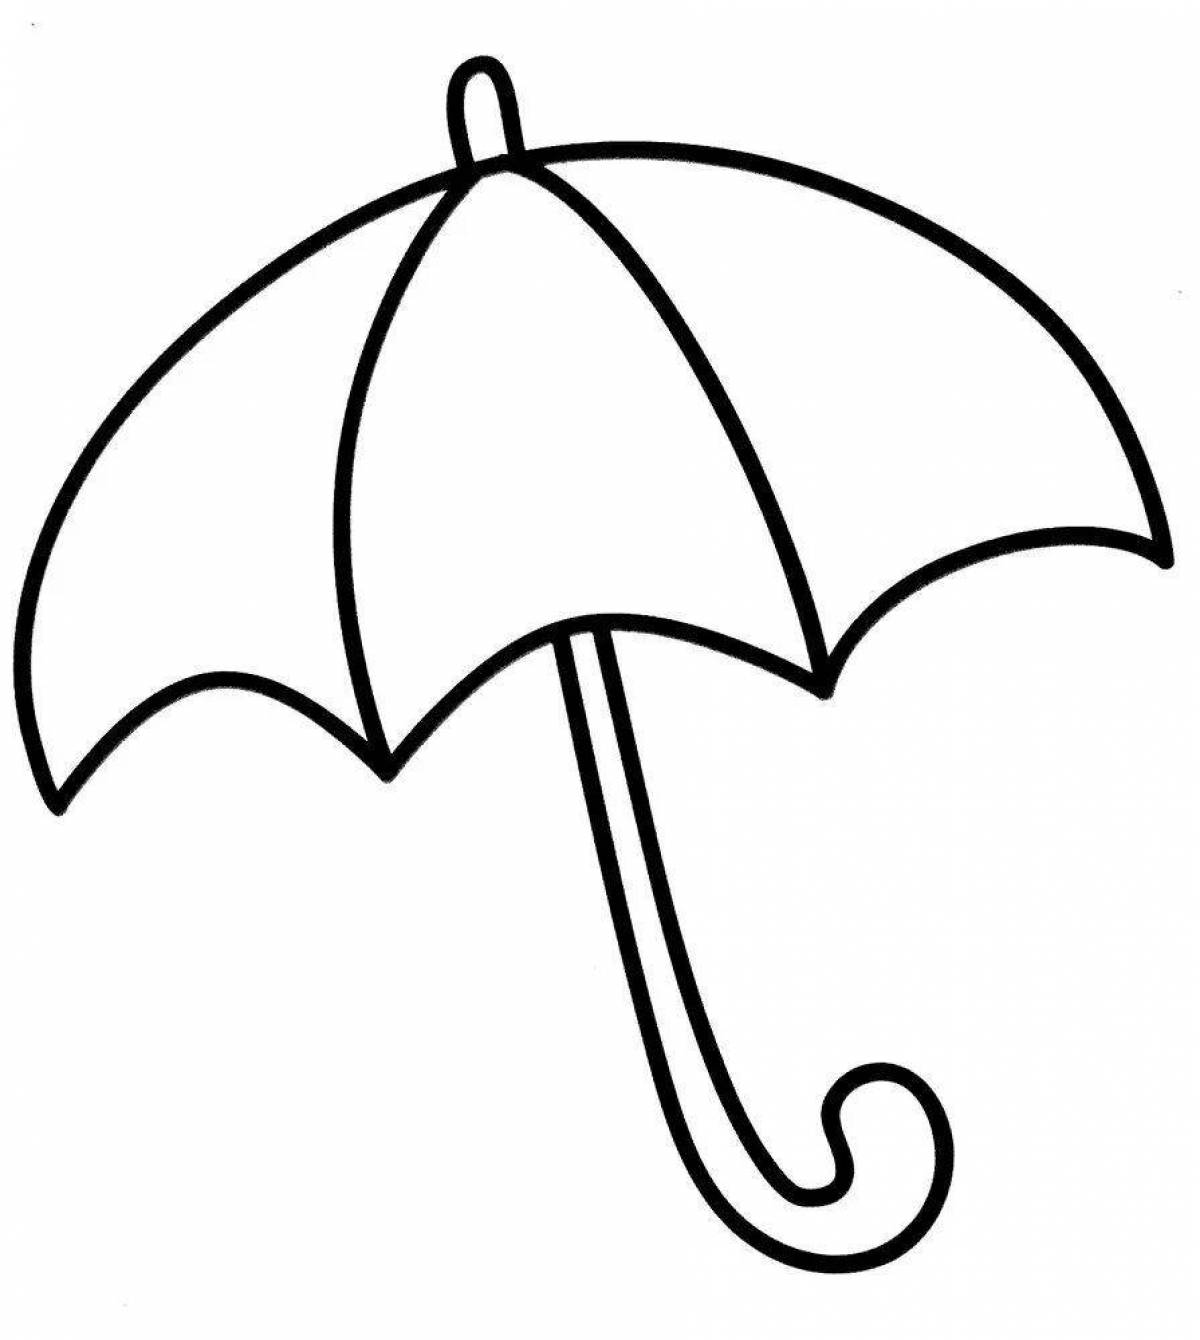 Colourful, colorful and bright umbrella coloring book for kids